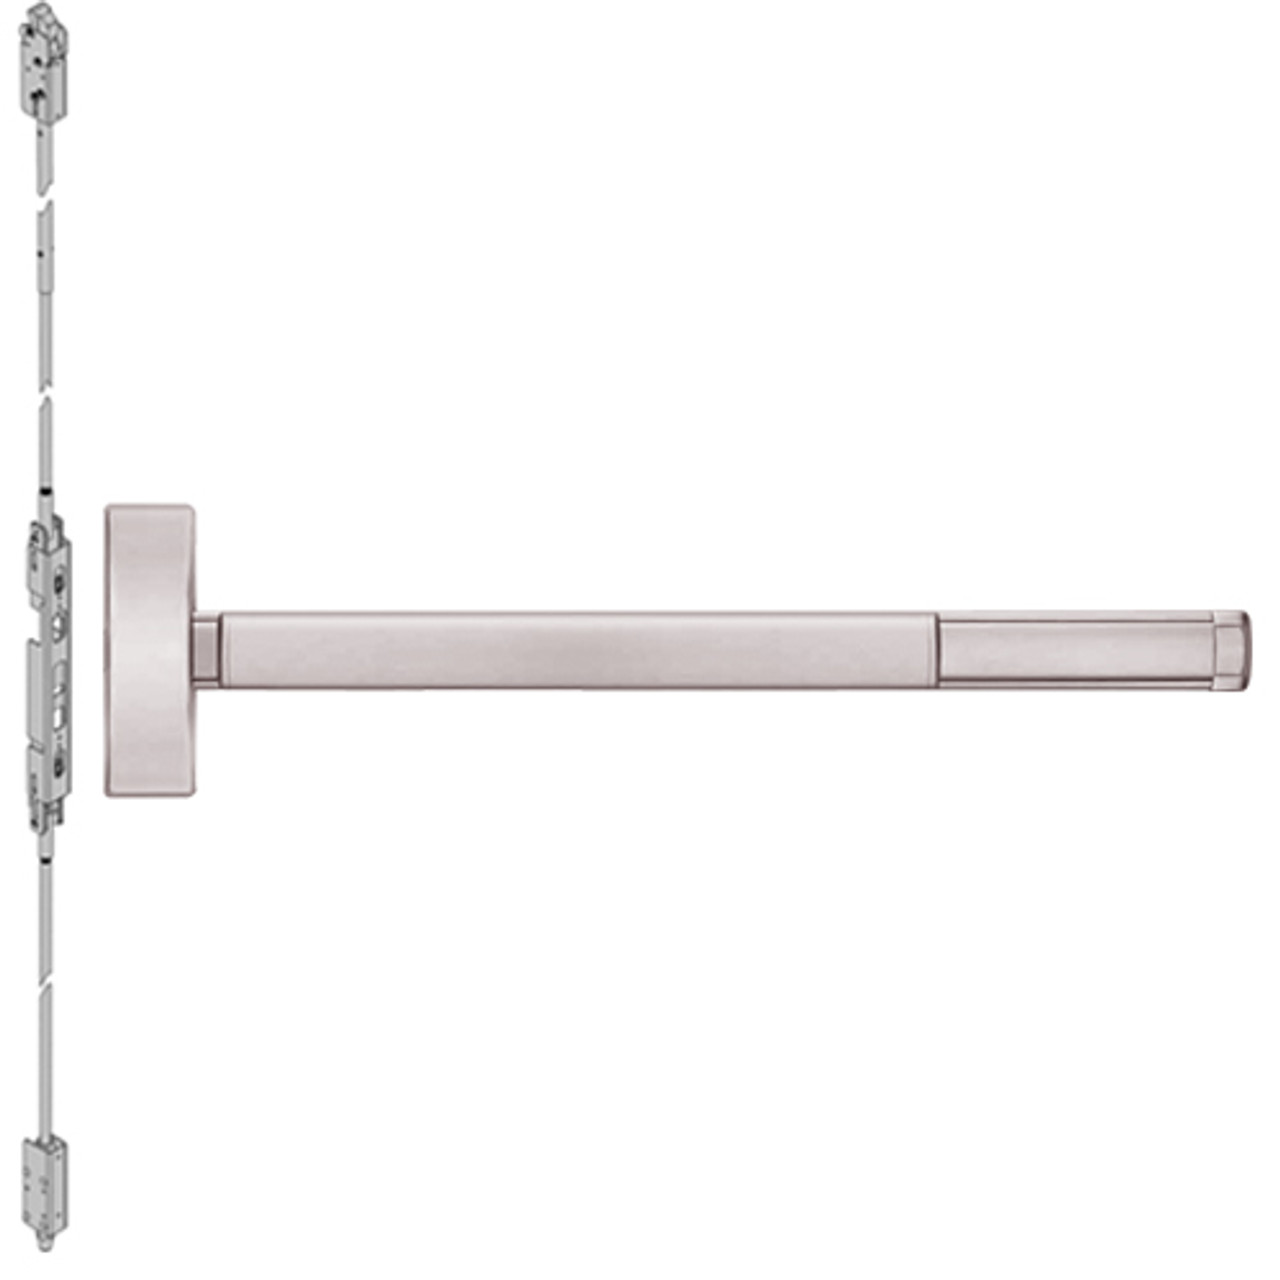 ELR2801LBR-628-48 PHI 2800 Series Concealed Vertical Rod Exit Device with Electric Latch Retraction Prepped for Cover Plate in Satin Aluminum Finish